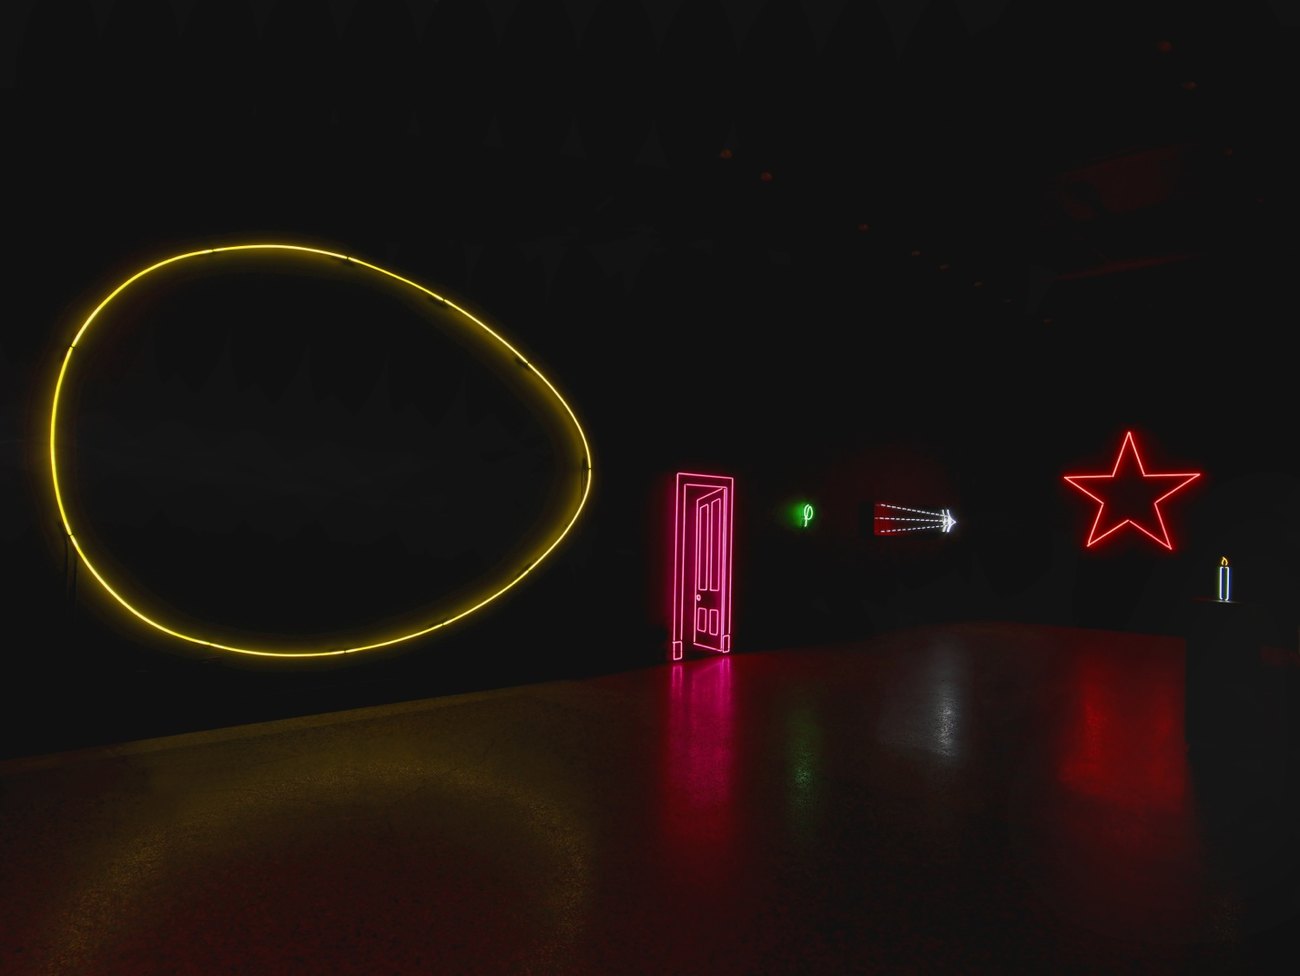 large yellow neon outline of an egg, red neon door, red neon start, all against black backdrop